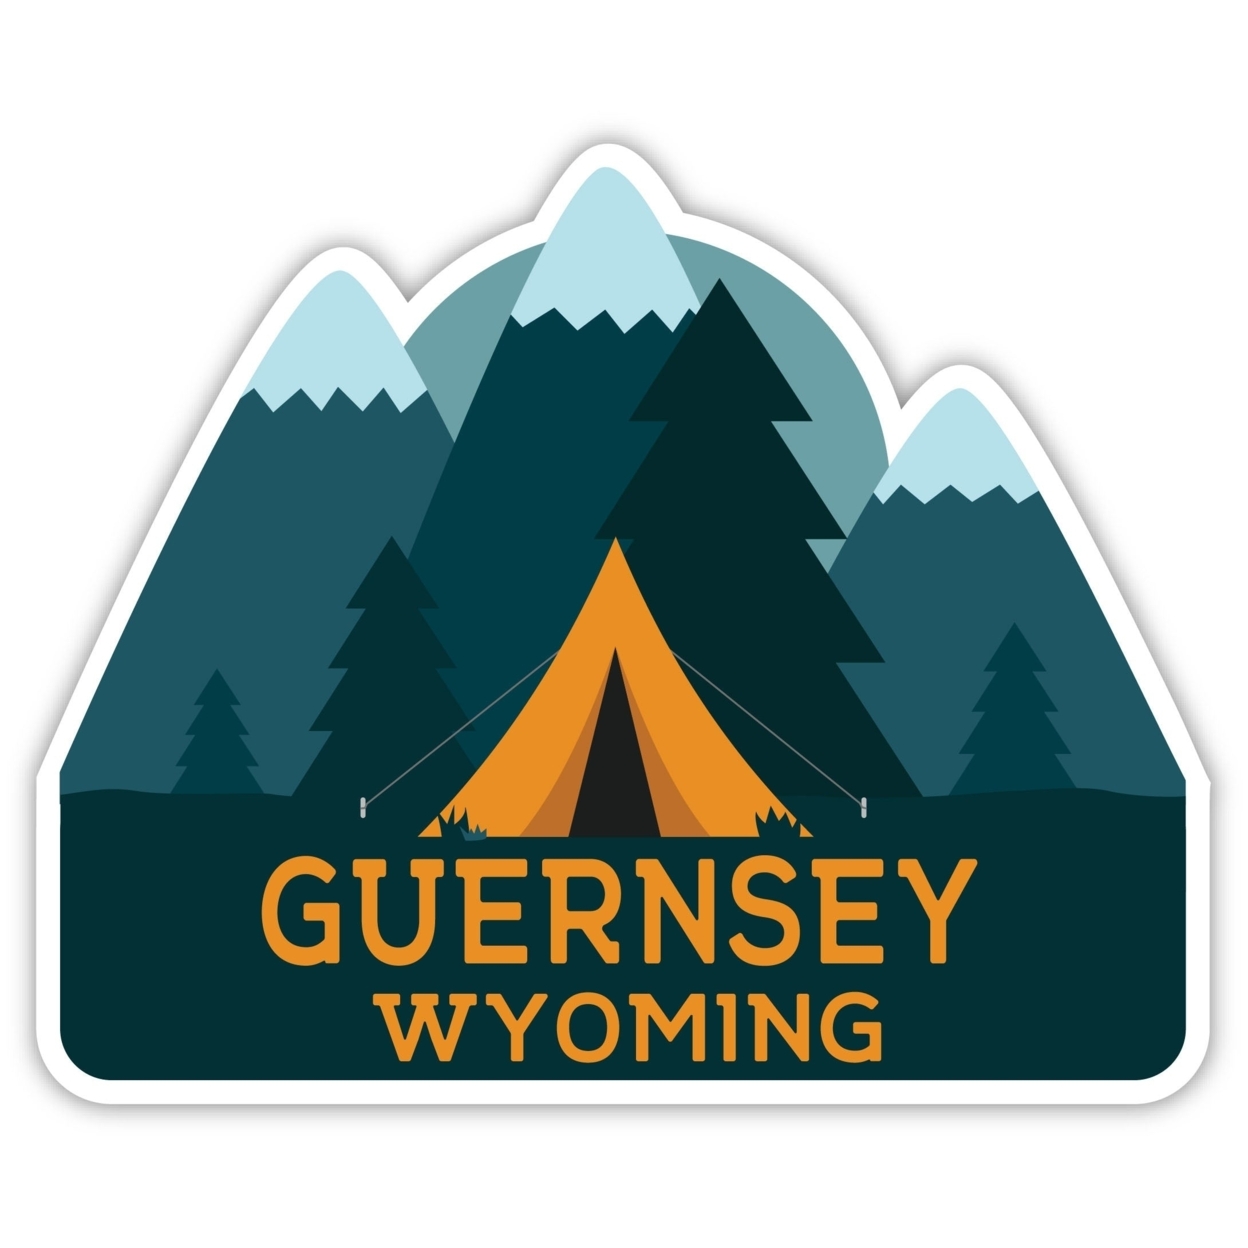 Guernsey Wyoming Souvenir Decorative Stickers (Choose Theme And Size) - 4-Pack, 8-Inch, Tent